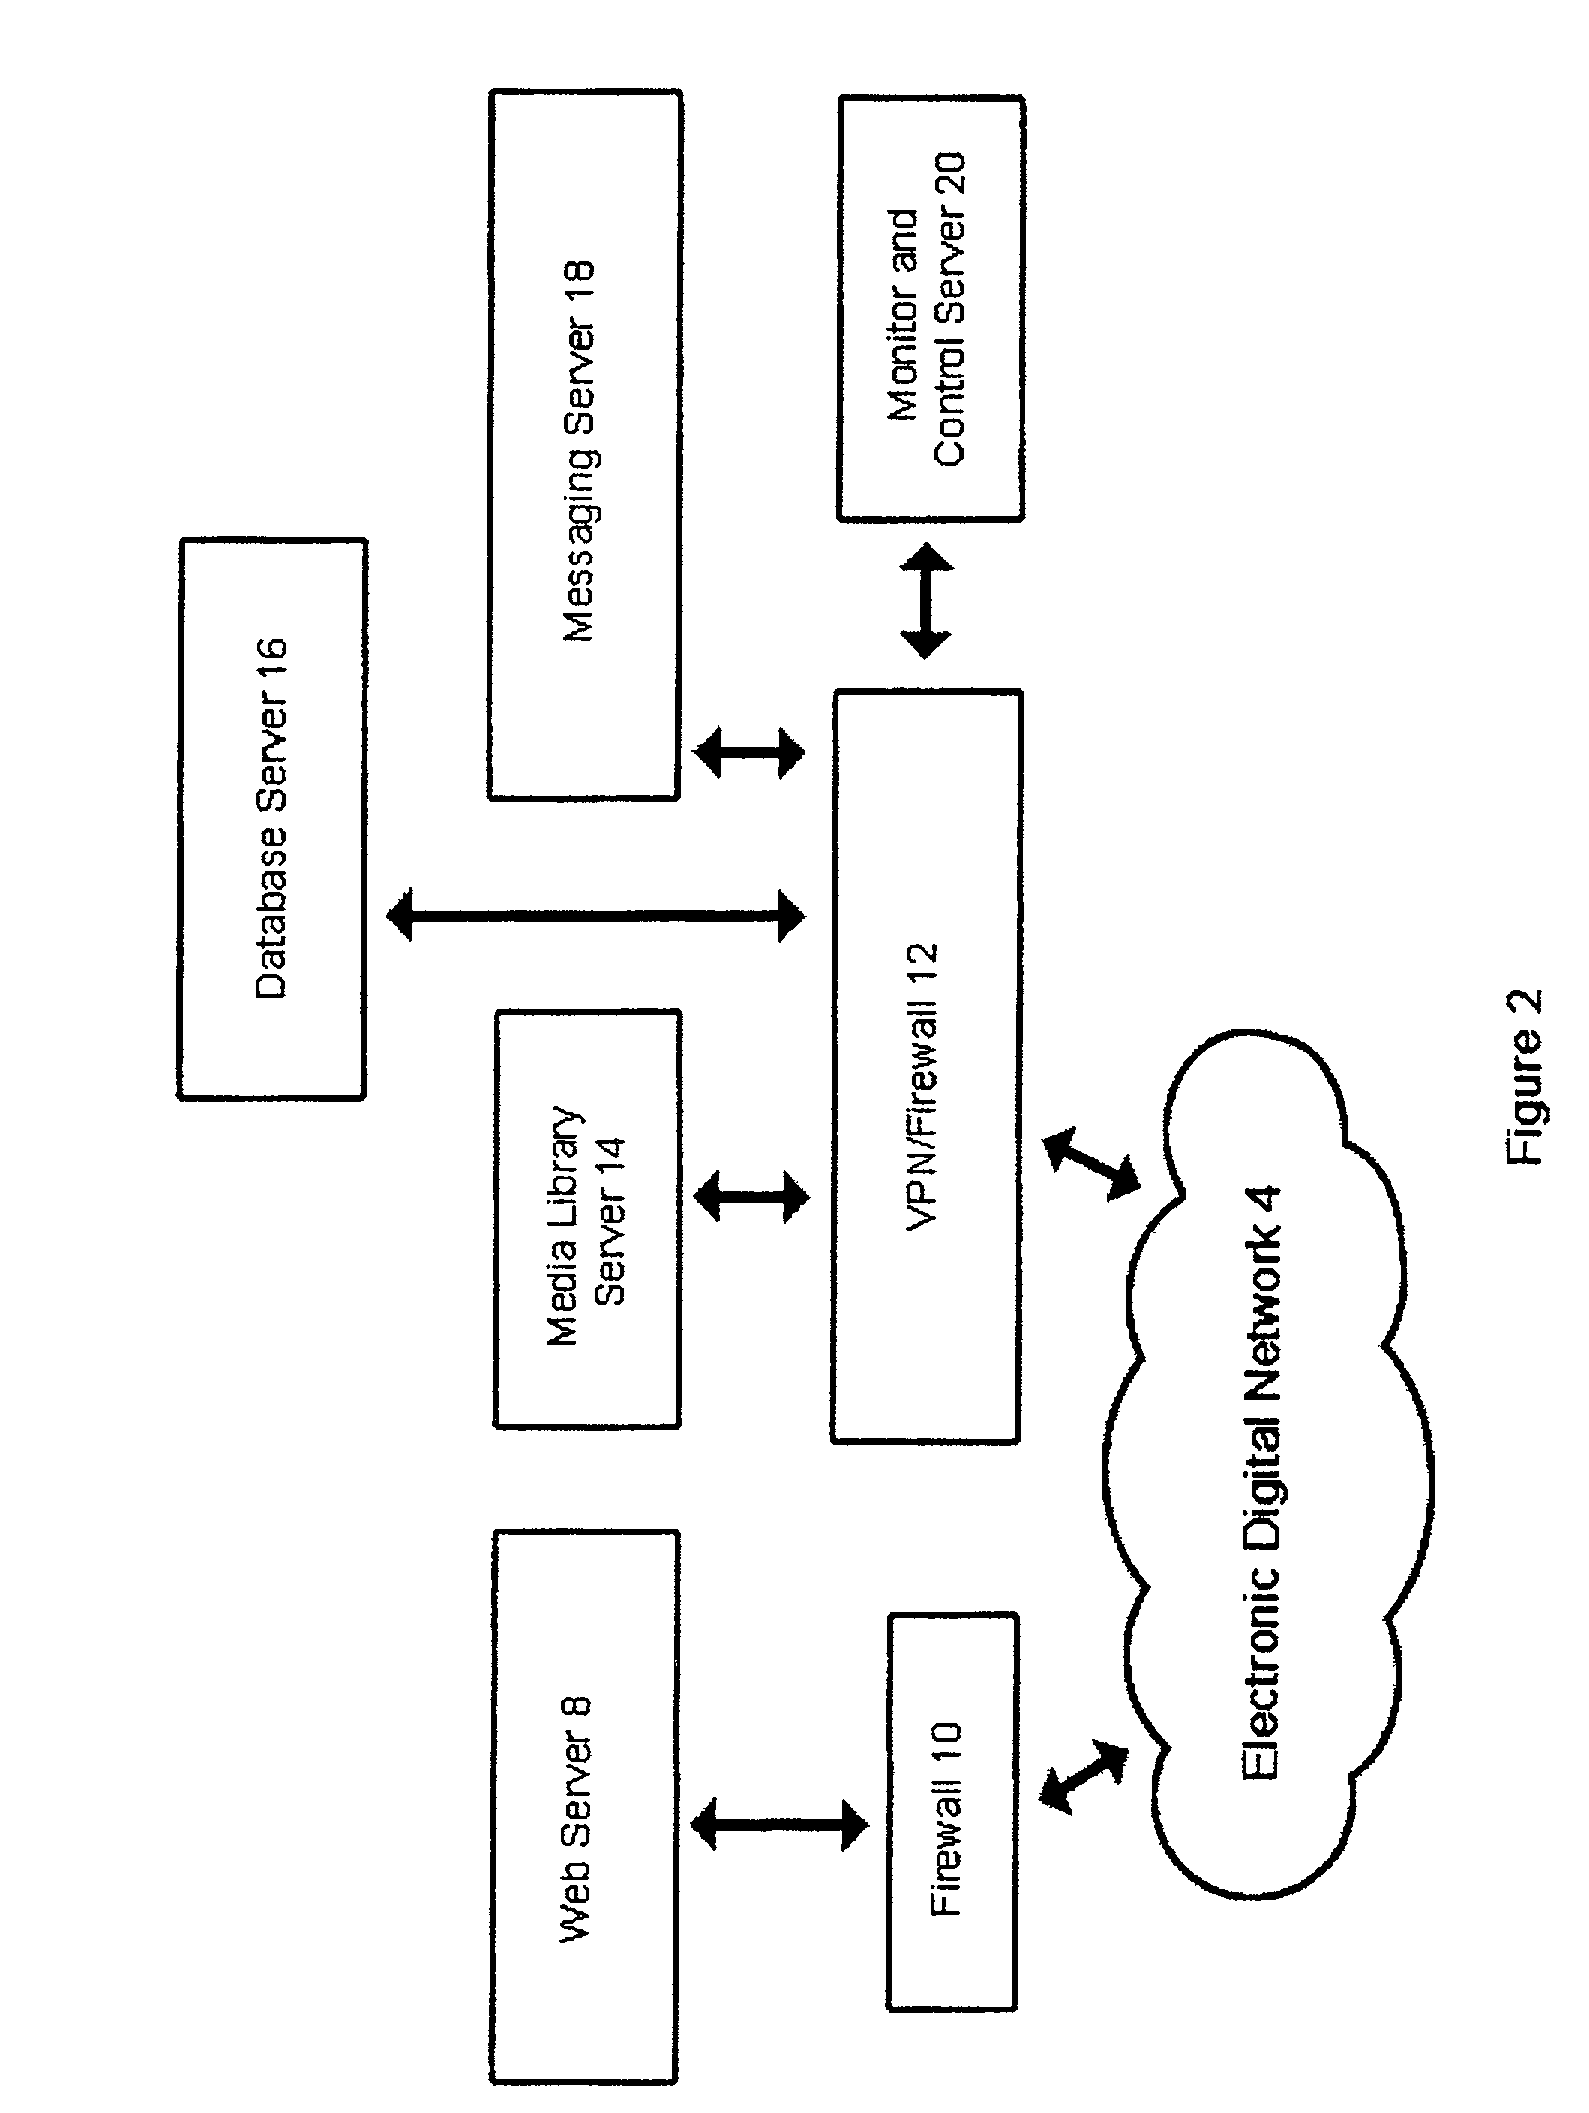 Media content display system with presence and damage sensors